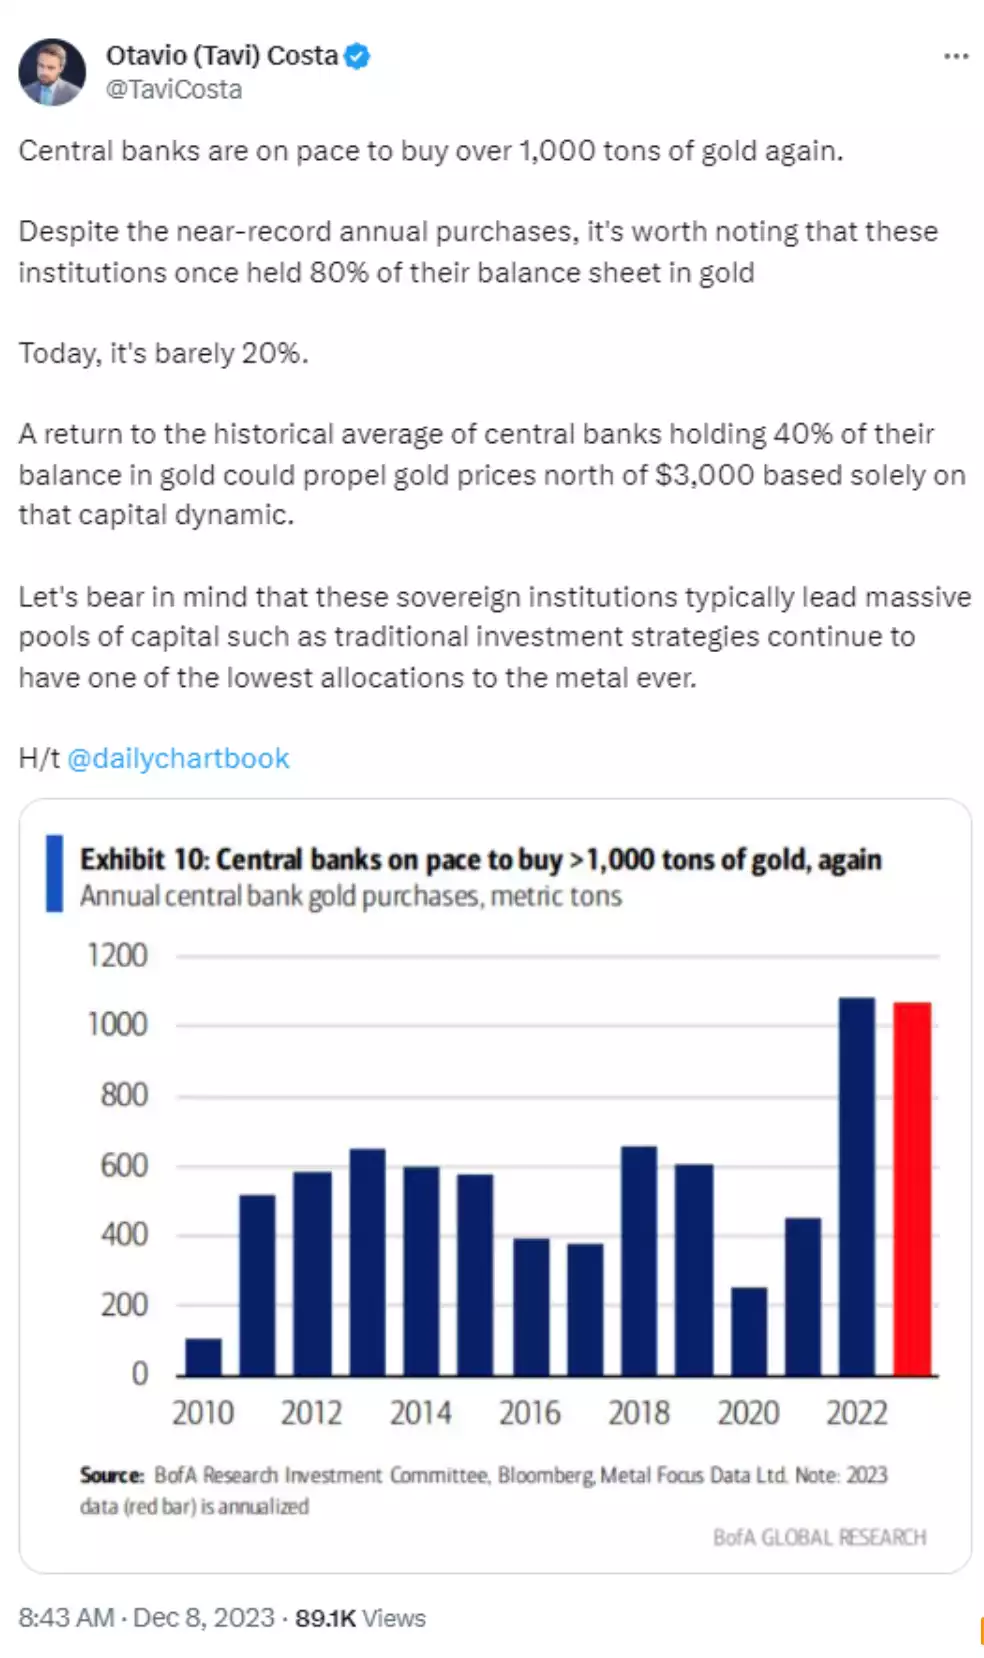 Tweet from @TaviCosta on Central Banks buying gold